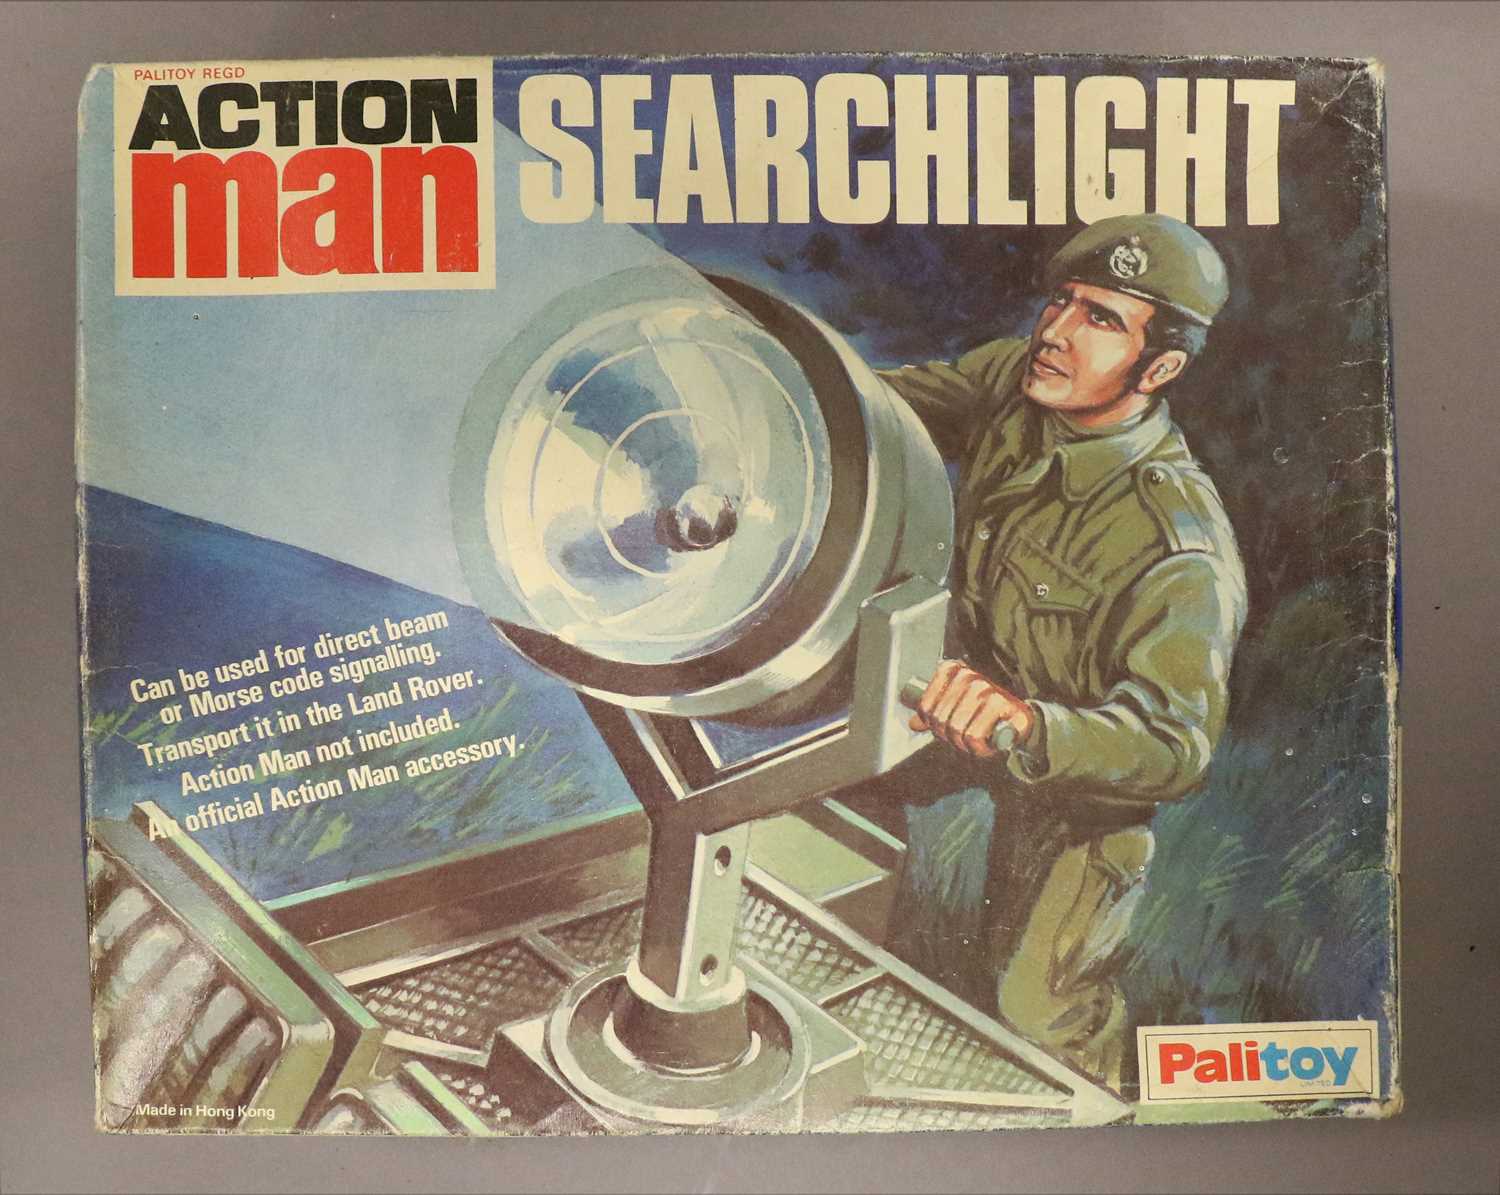 Palitoy Action Man Two Figures - Image 2 of 4